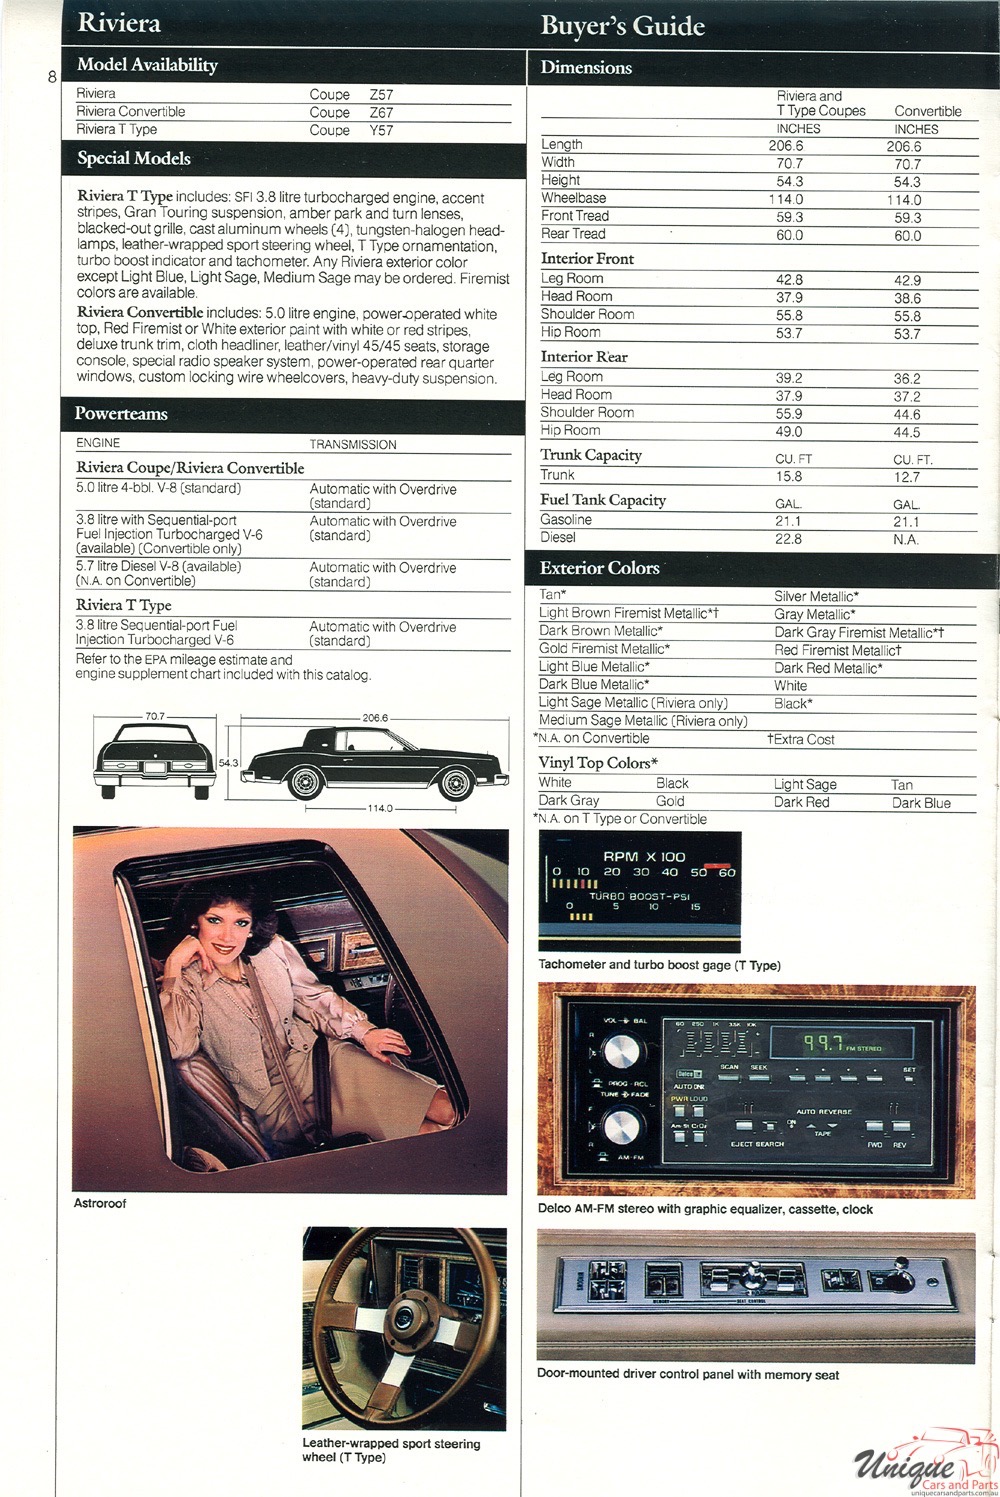 1985 Buick Buying Guide Page 5